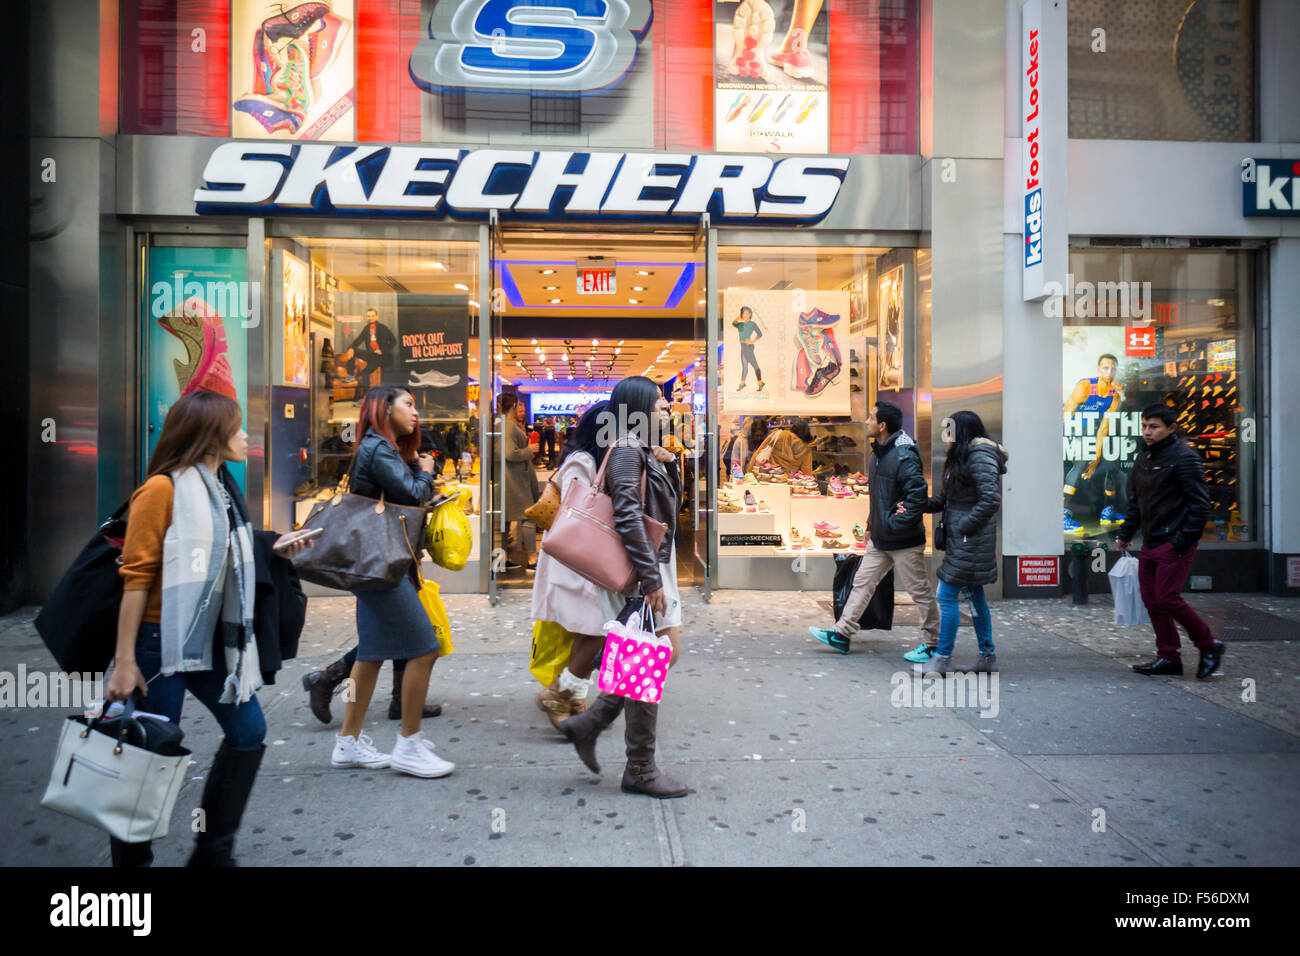 skechers 3 times square